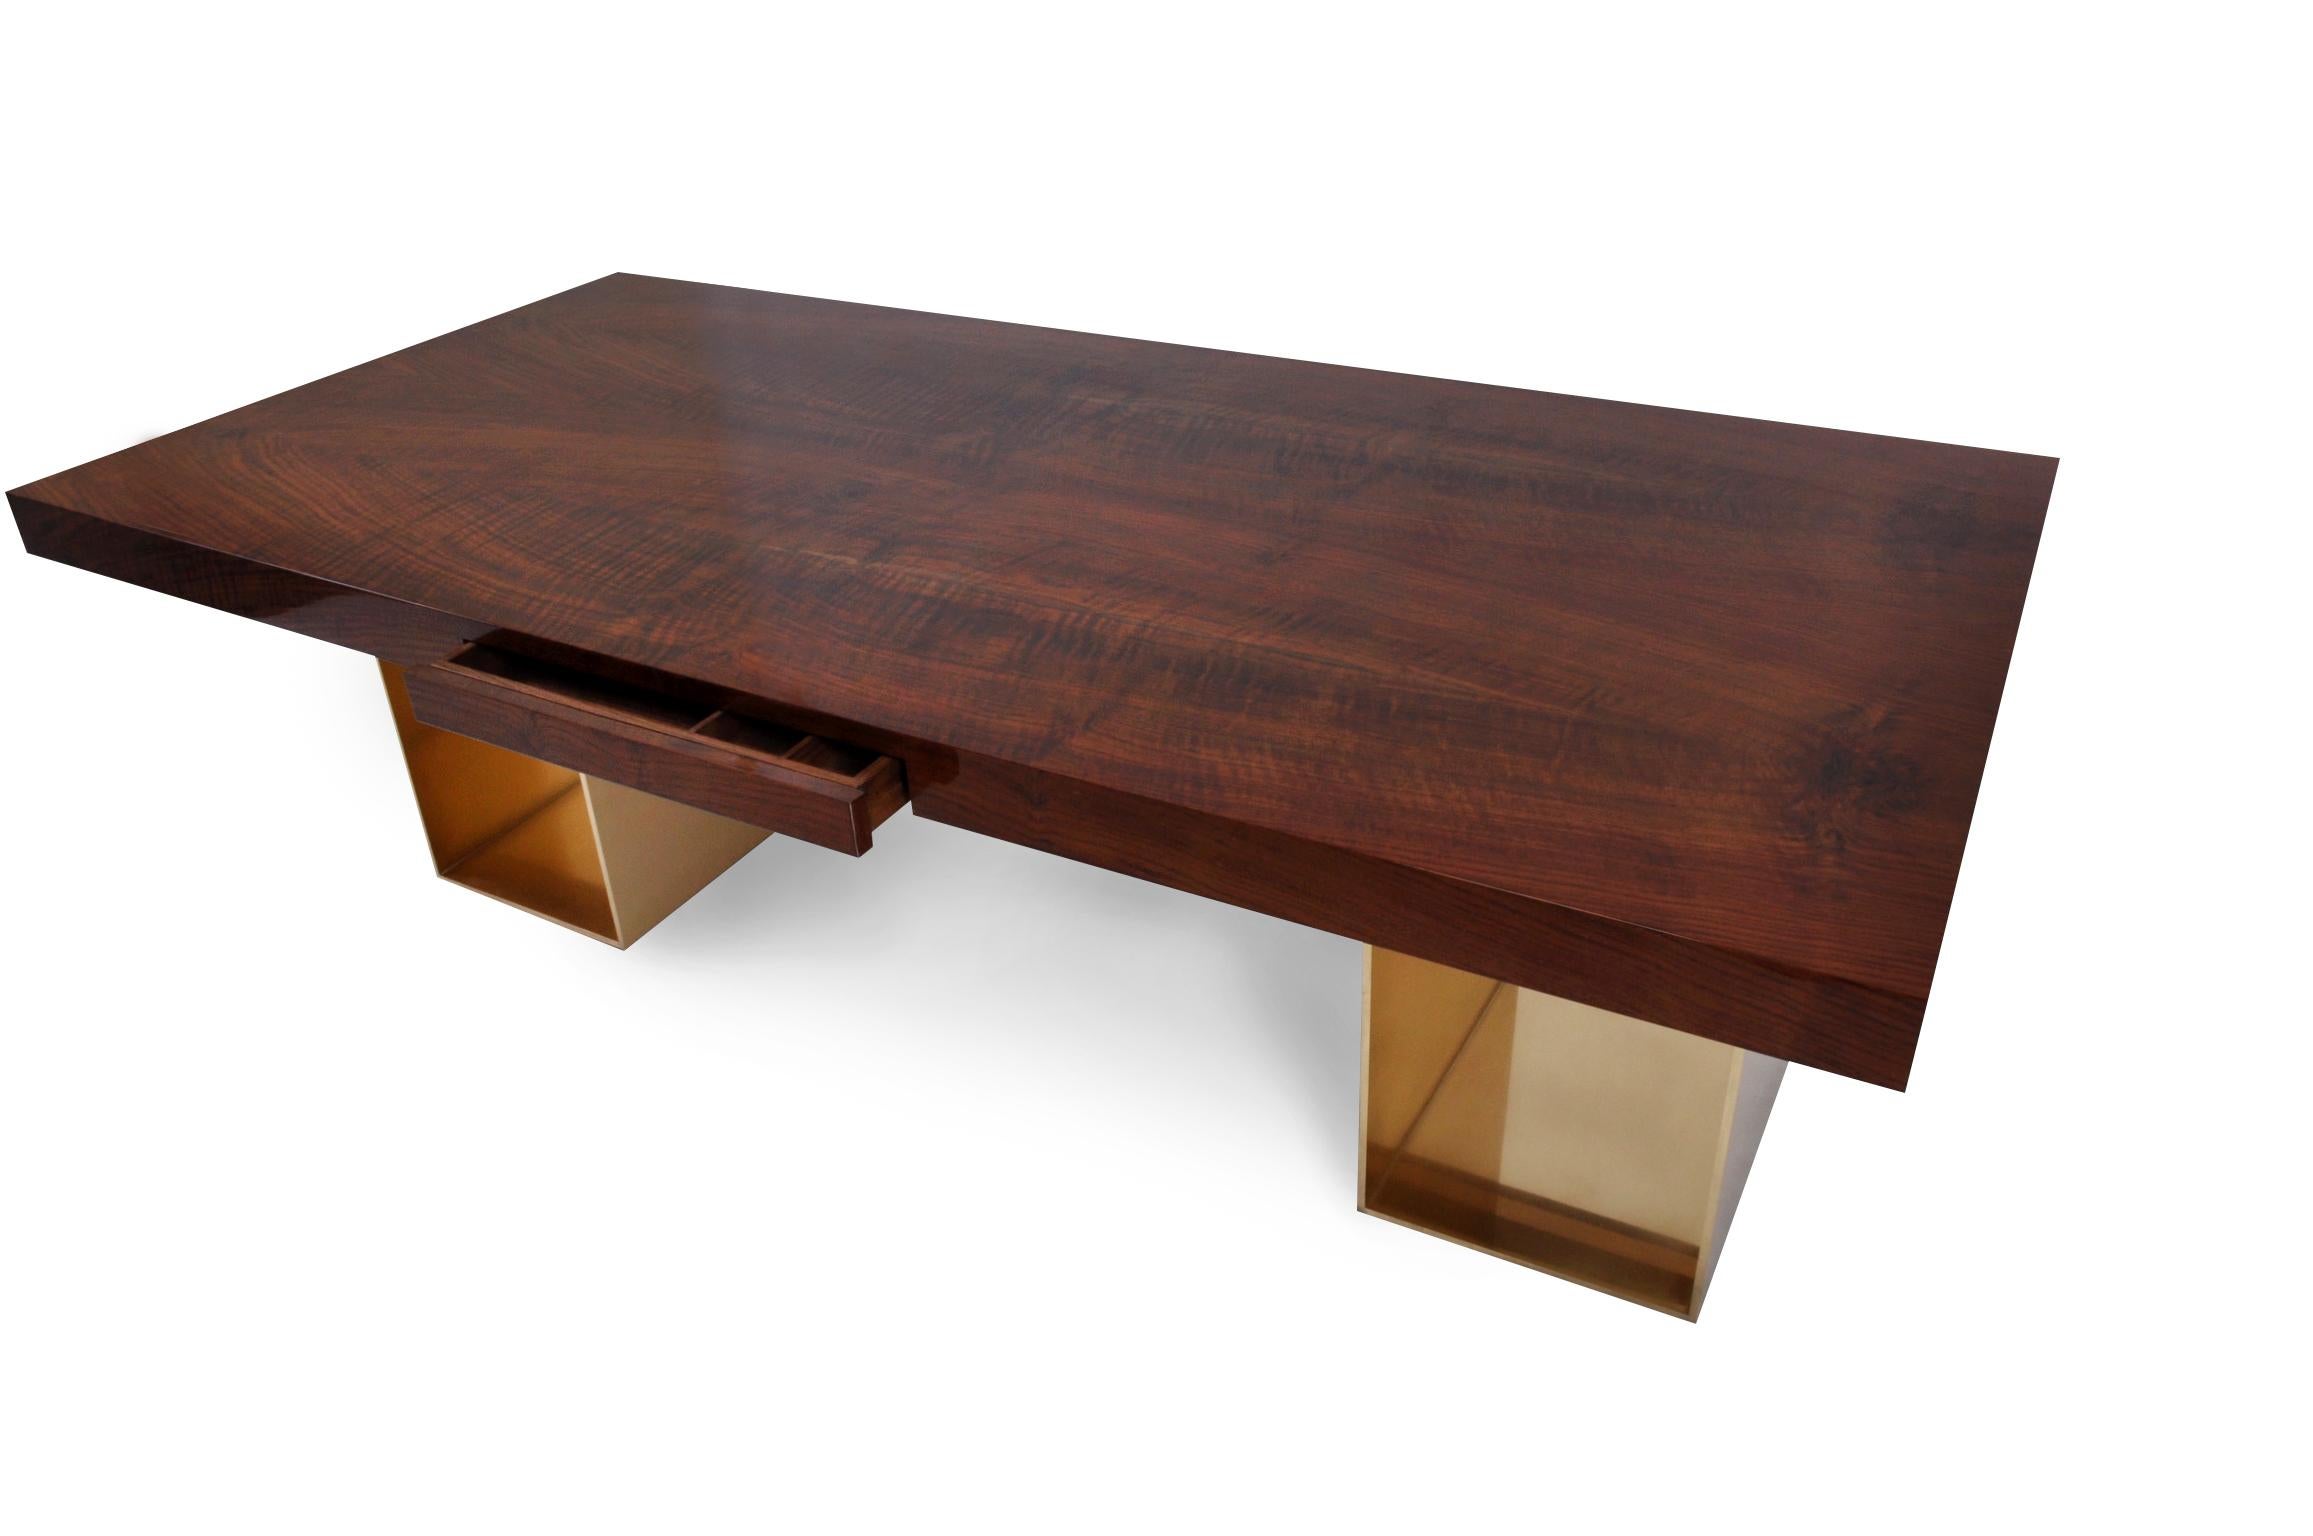 Contemporary Bespoke Desk in Claro Walnut and Bronze By Newell Design Studio For Sale